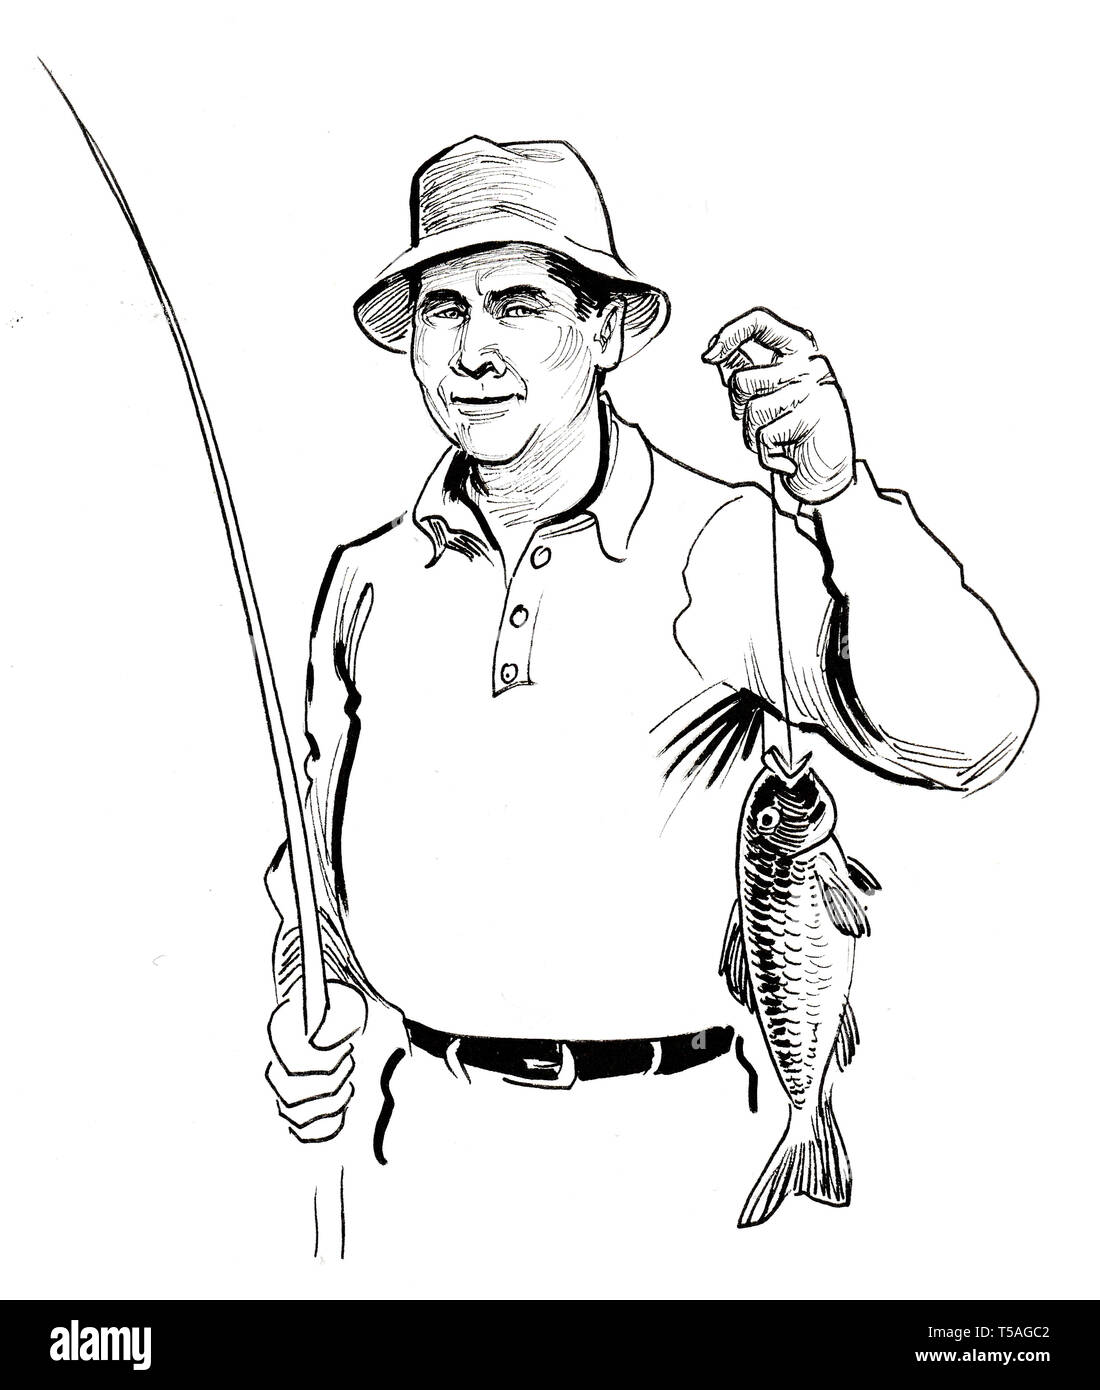 how to draw a fishing pole step by step  Fishing pole, Fish drawings, Ride  drawing